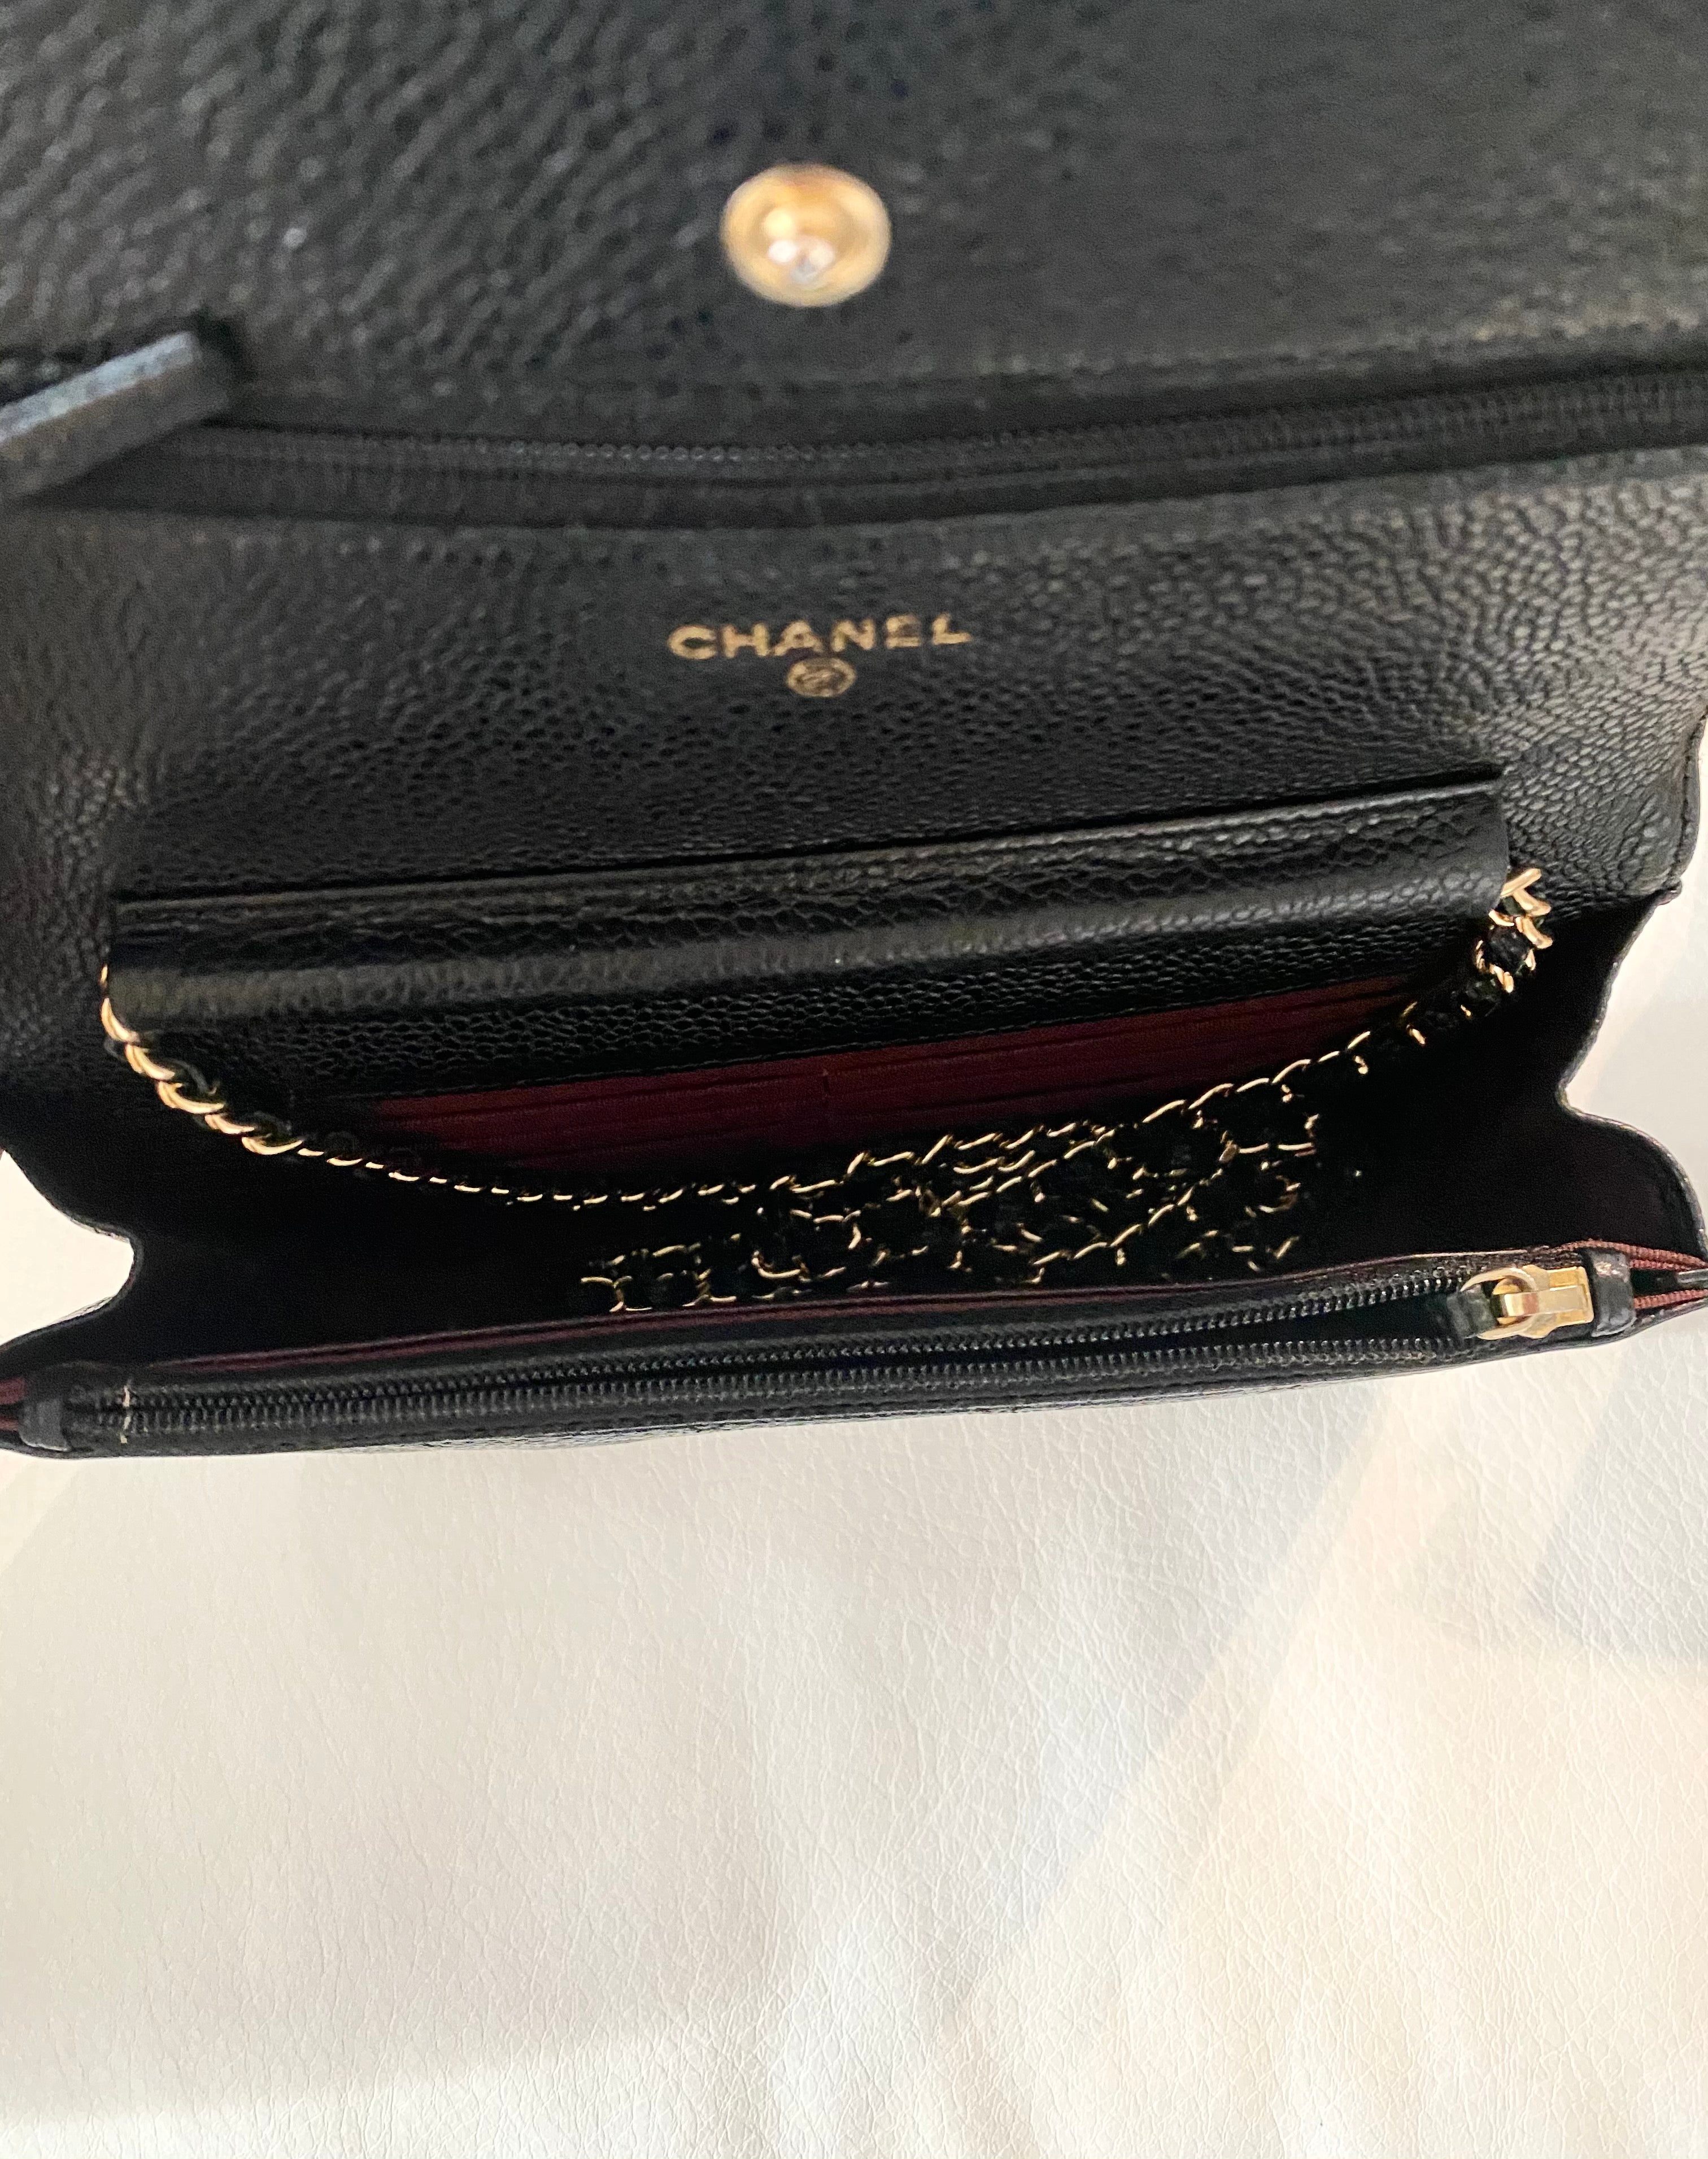 Chanel 19 woc – Beccas Bags